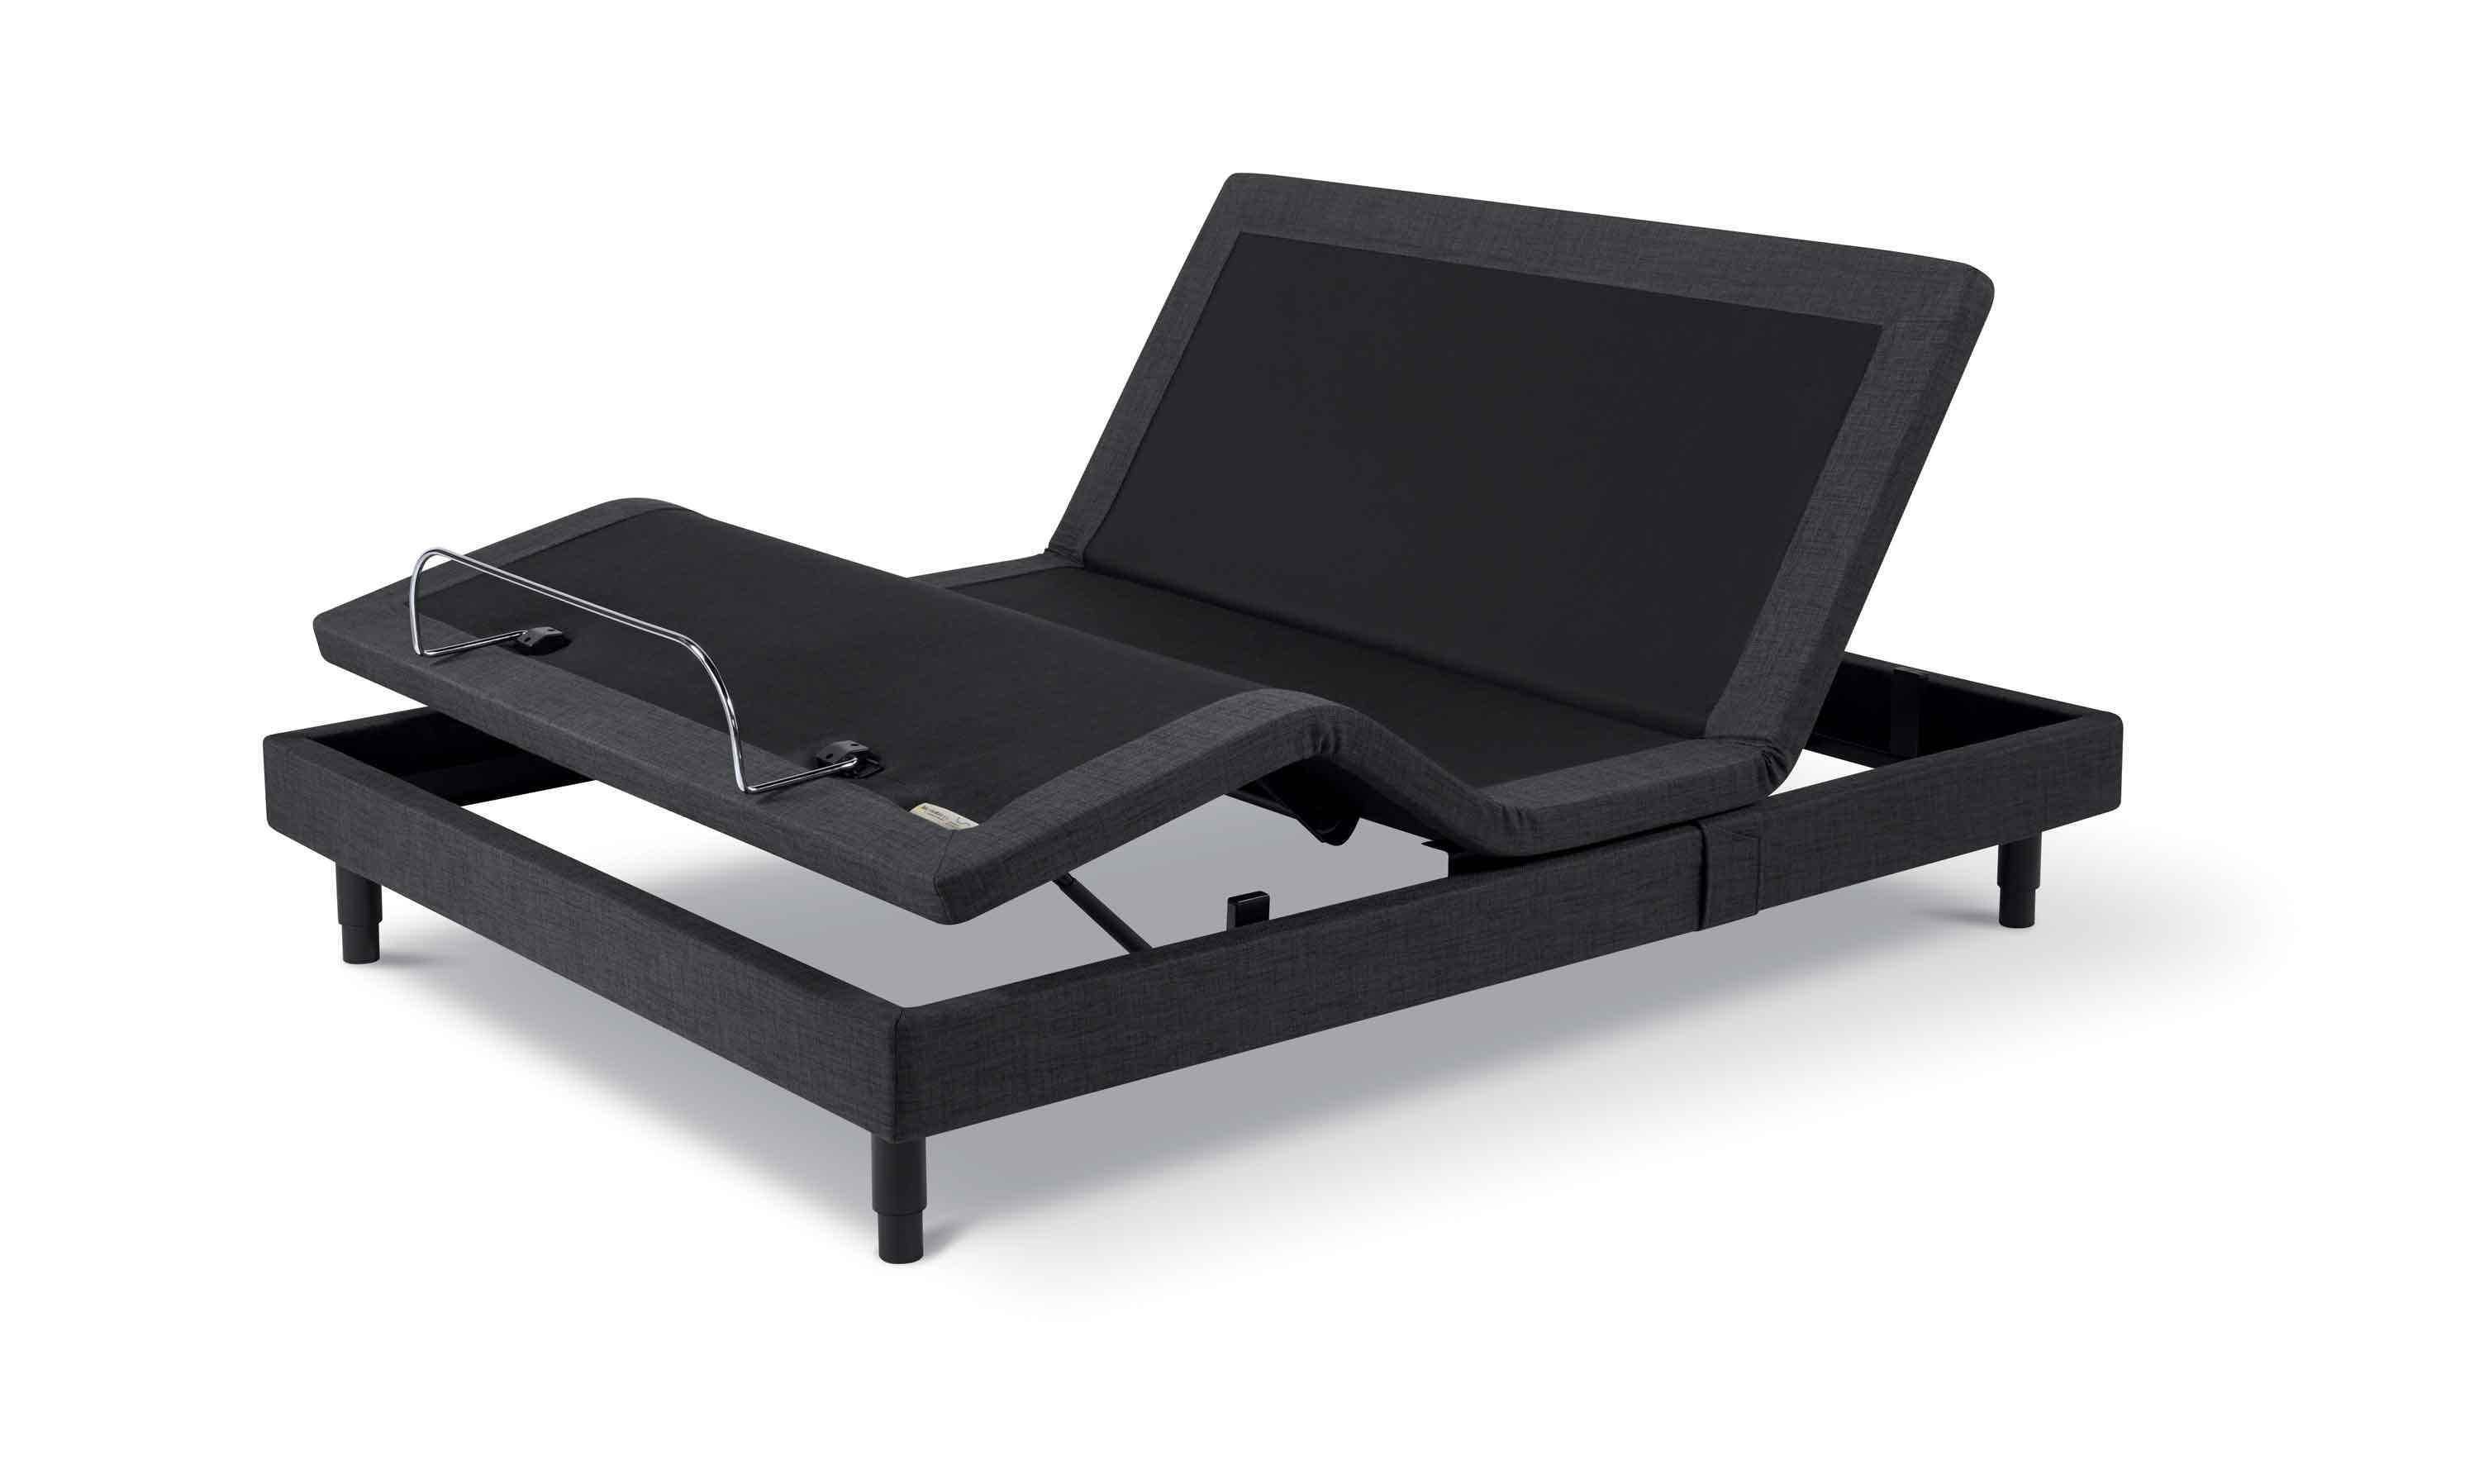 The Features And Benefits Of Adjustable Base Beds